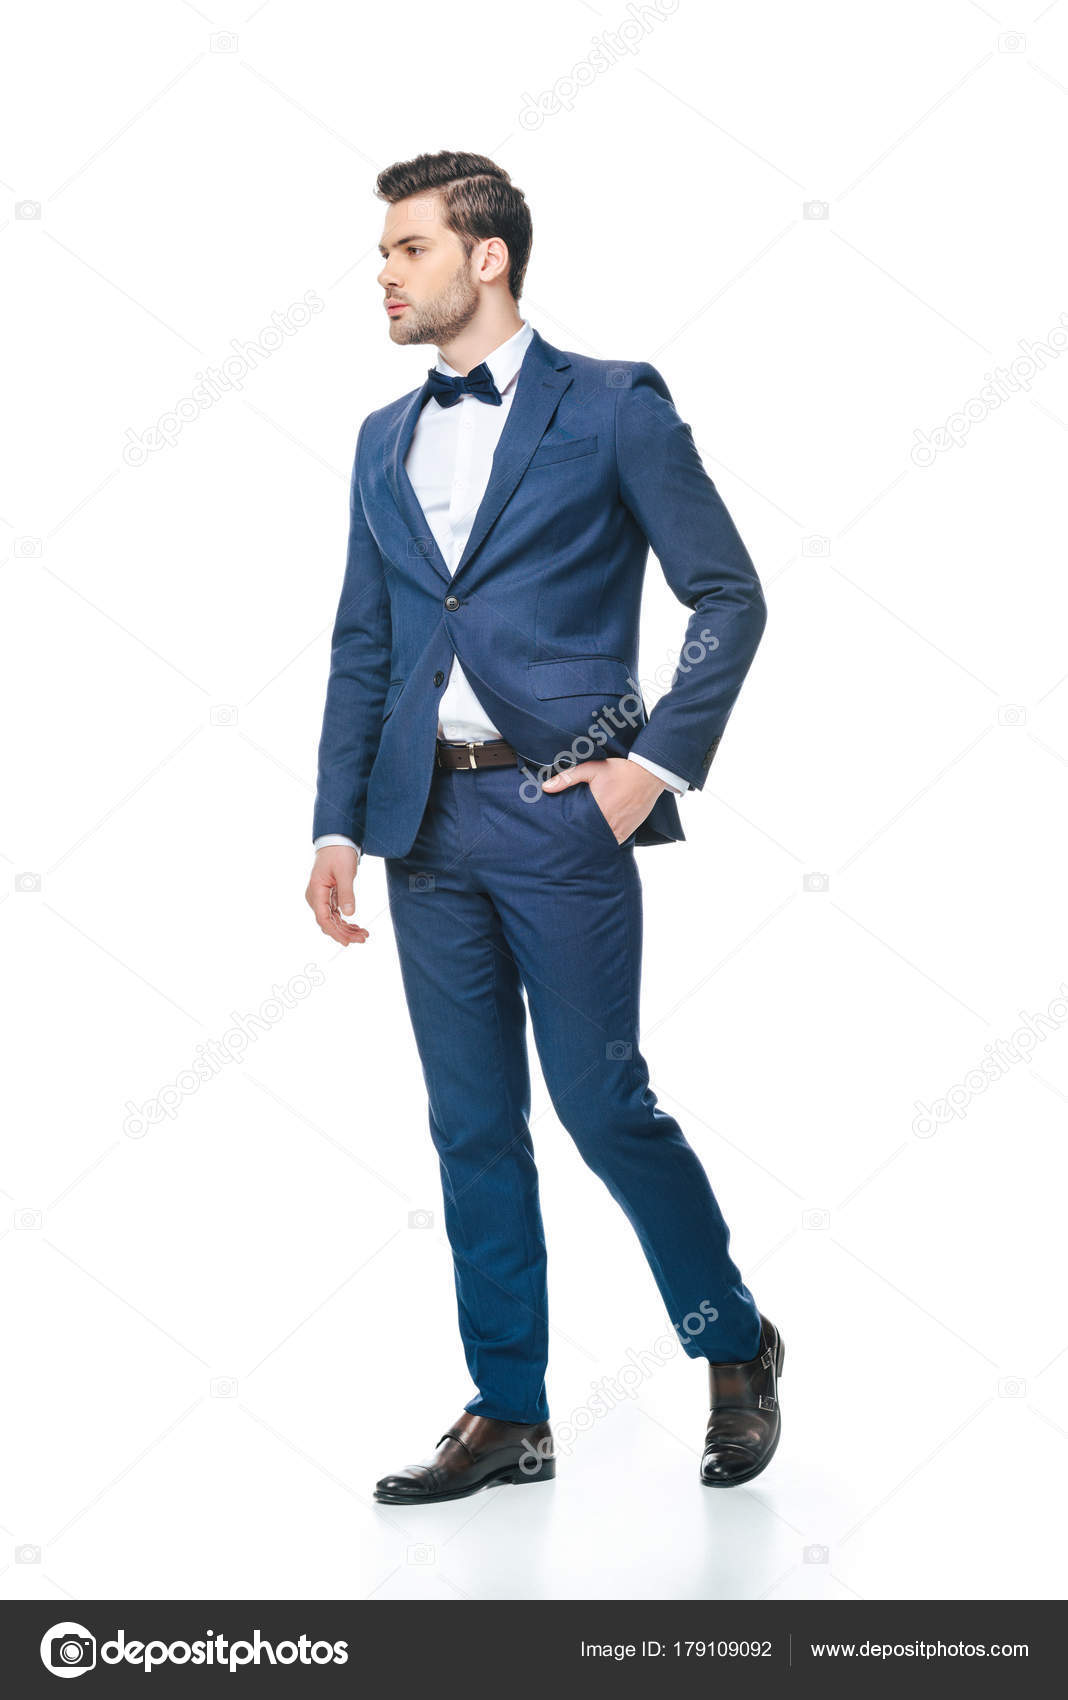 Male Model In A Suit Posing Outdoors Stock Photo, Picture and Royalty Free  Image. Image 75743240.